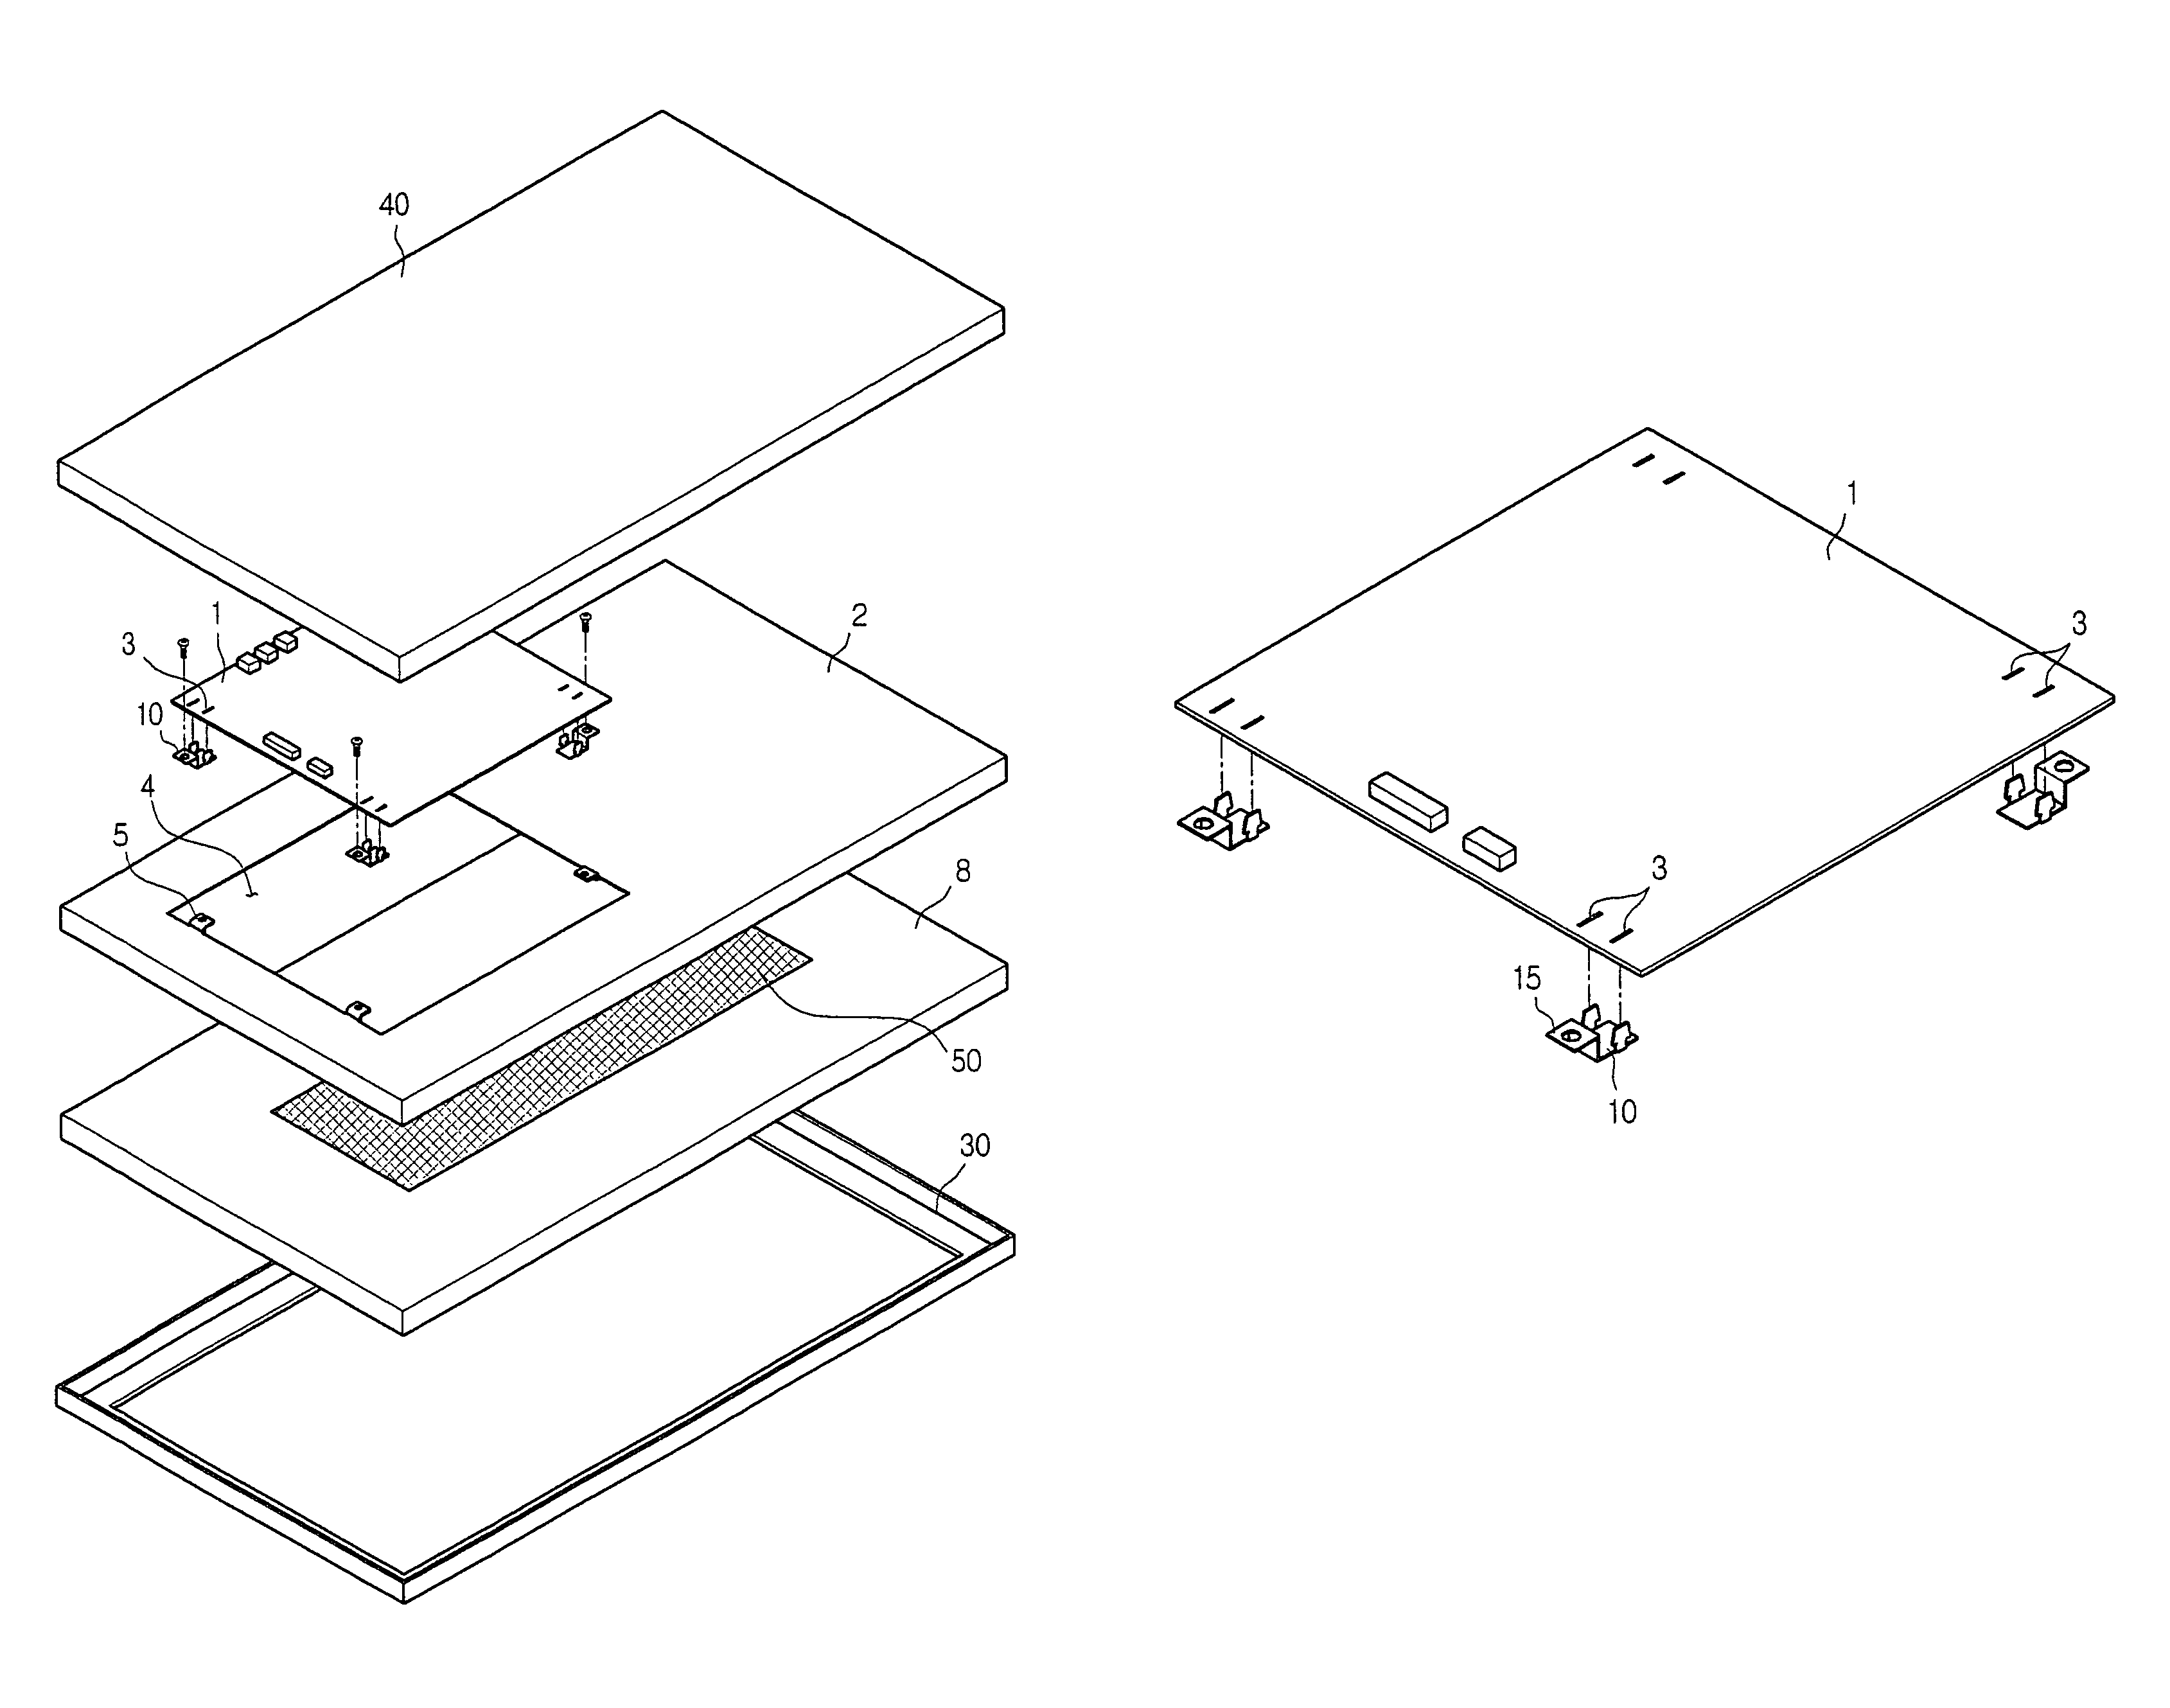 Display device and board supporting structure